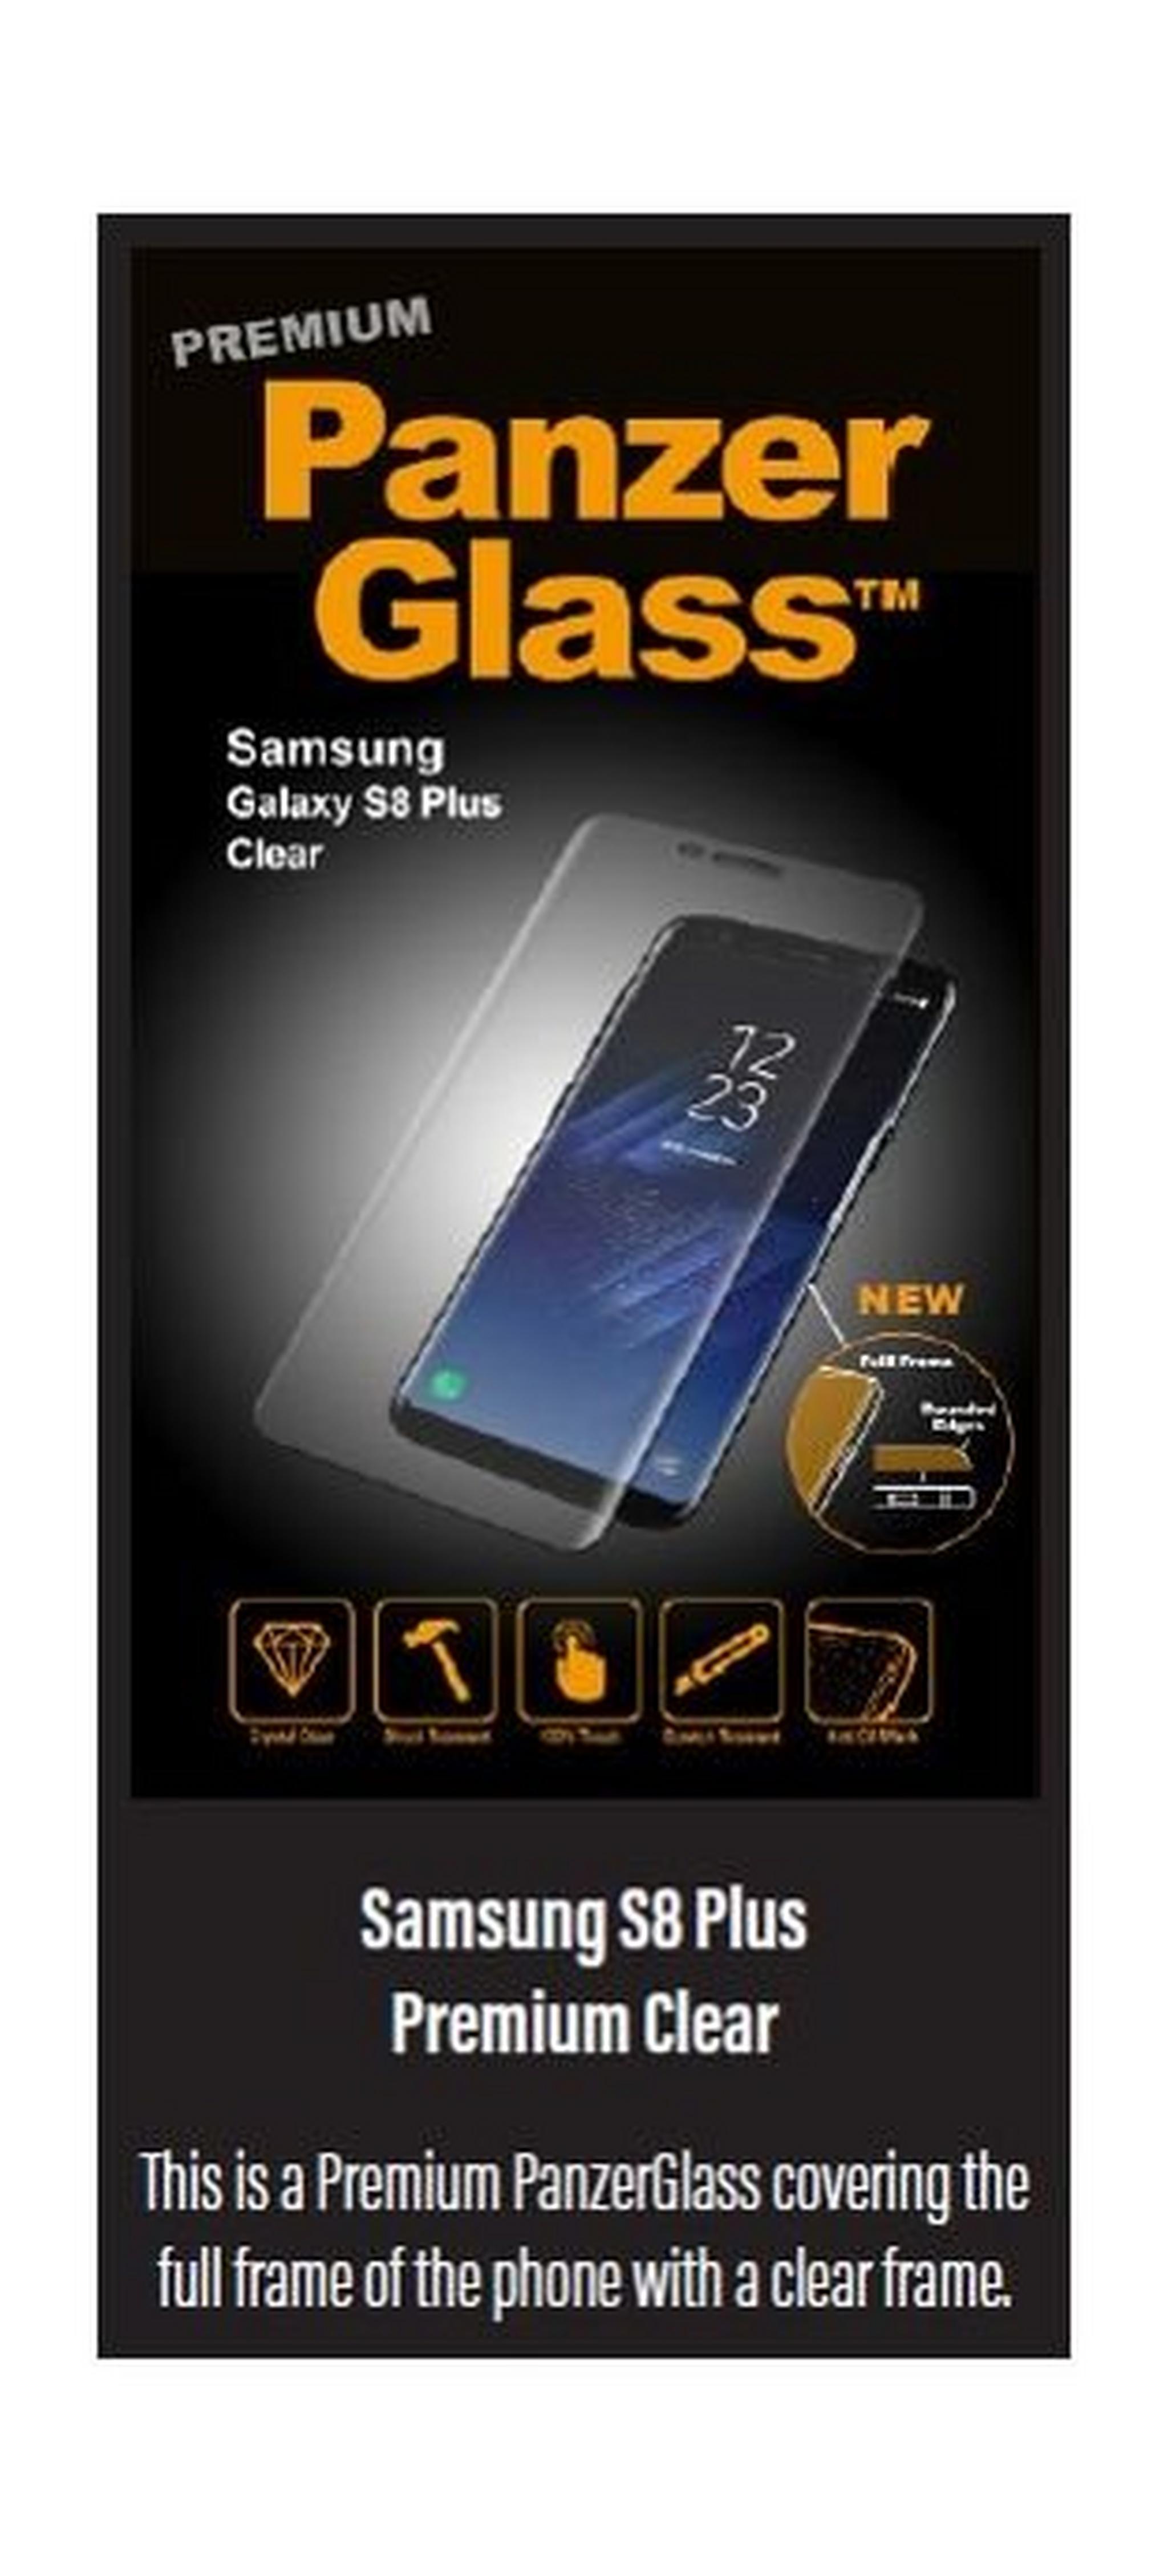 Panzer Glass Premium Screen Protector For Samsung Galaxy S8 Plus (7110) – Clear